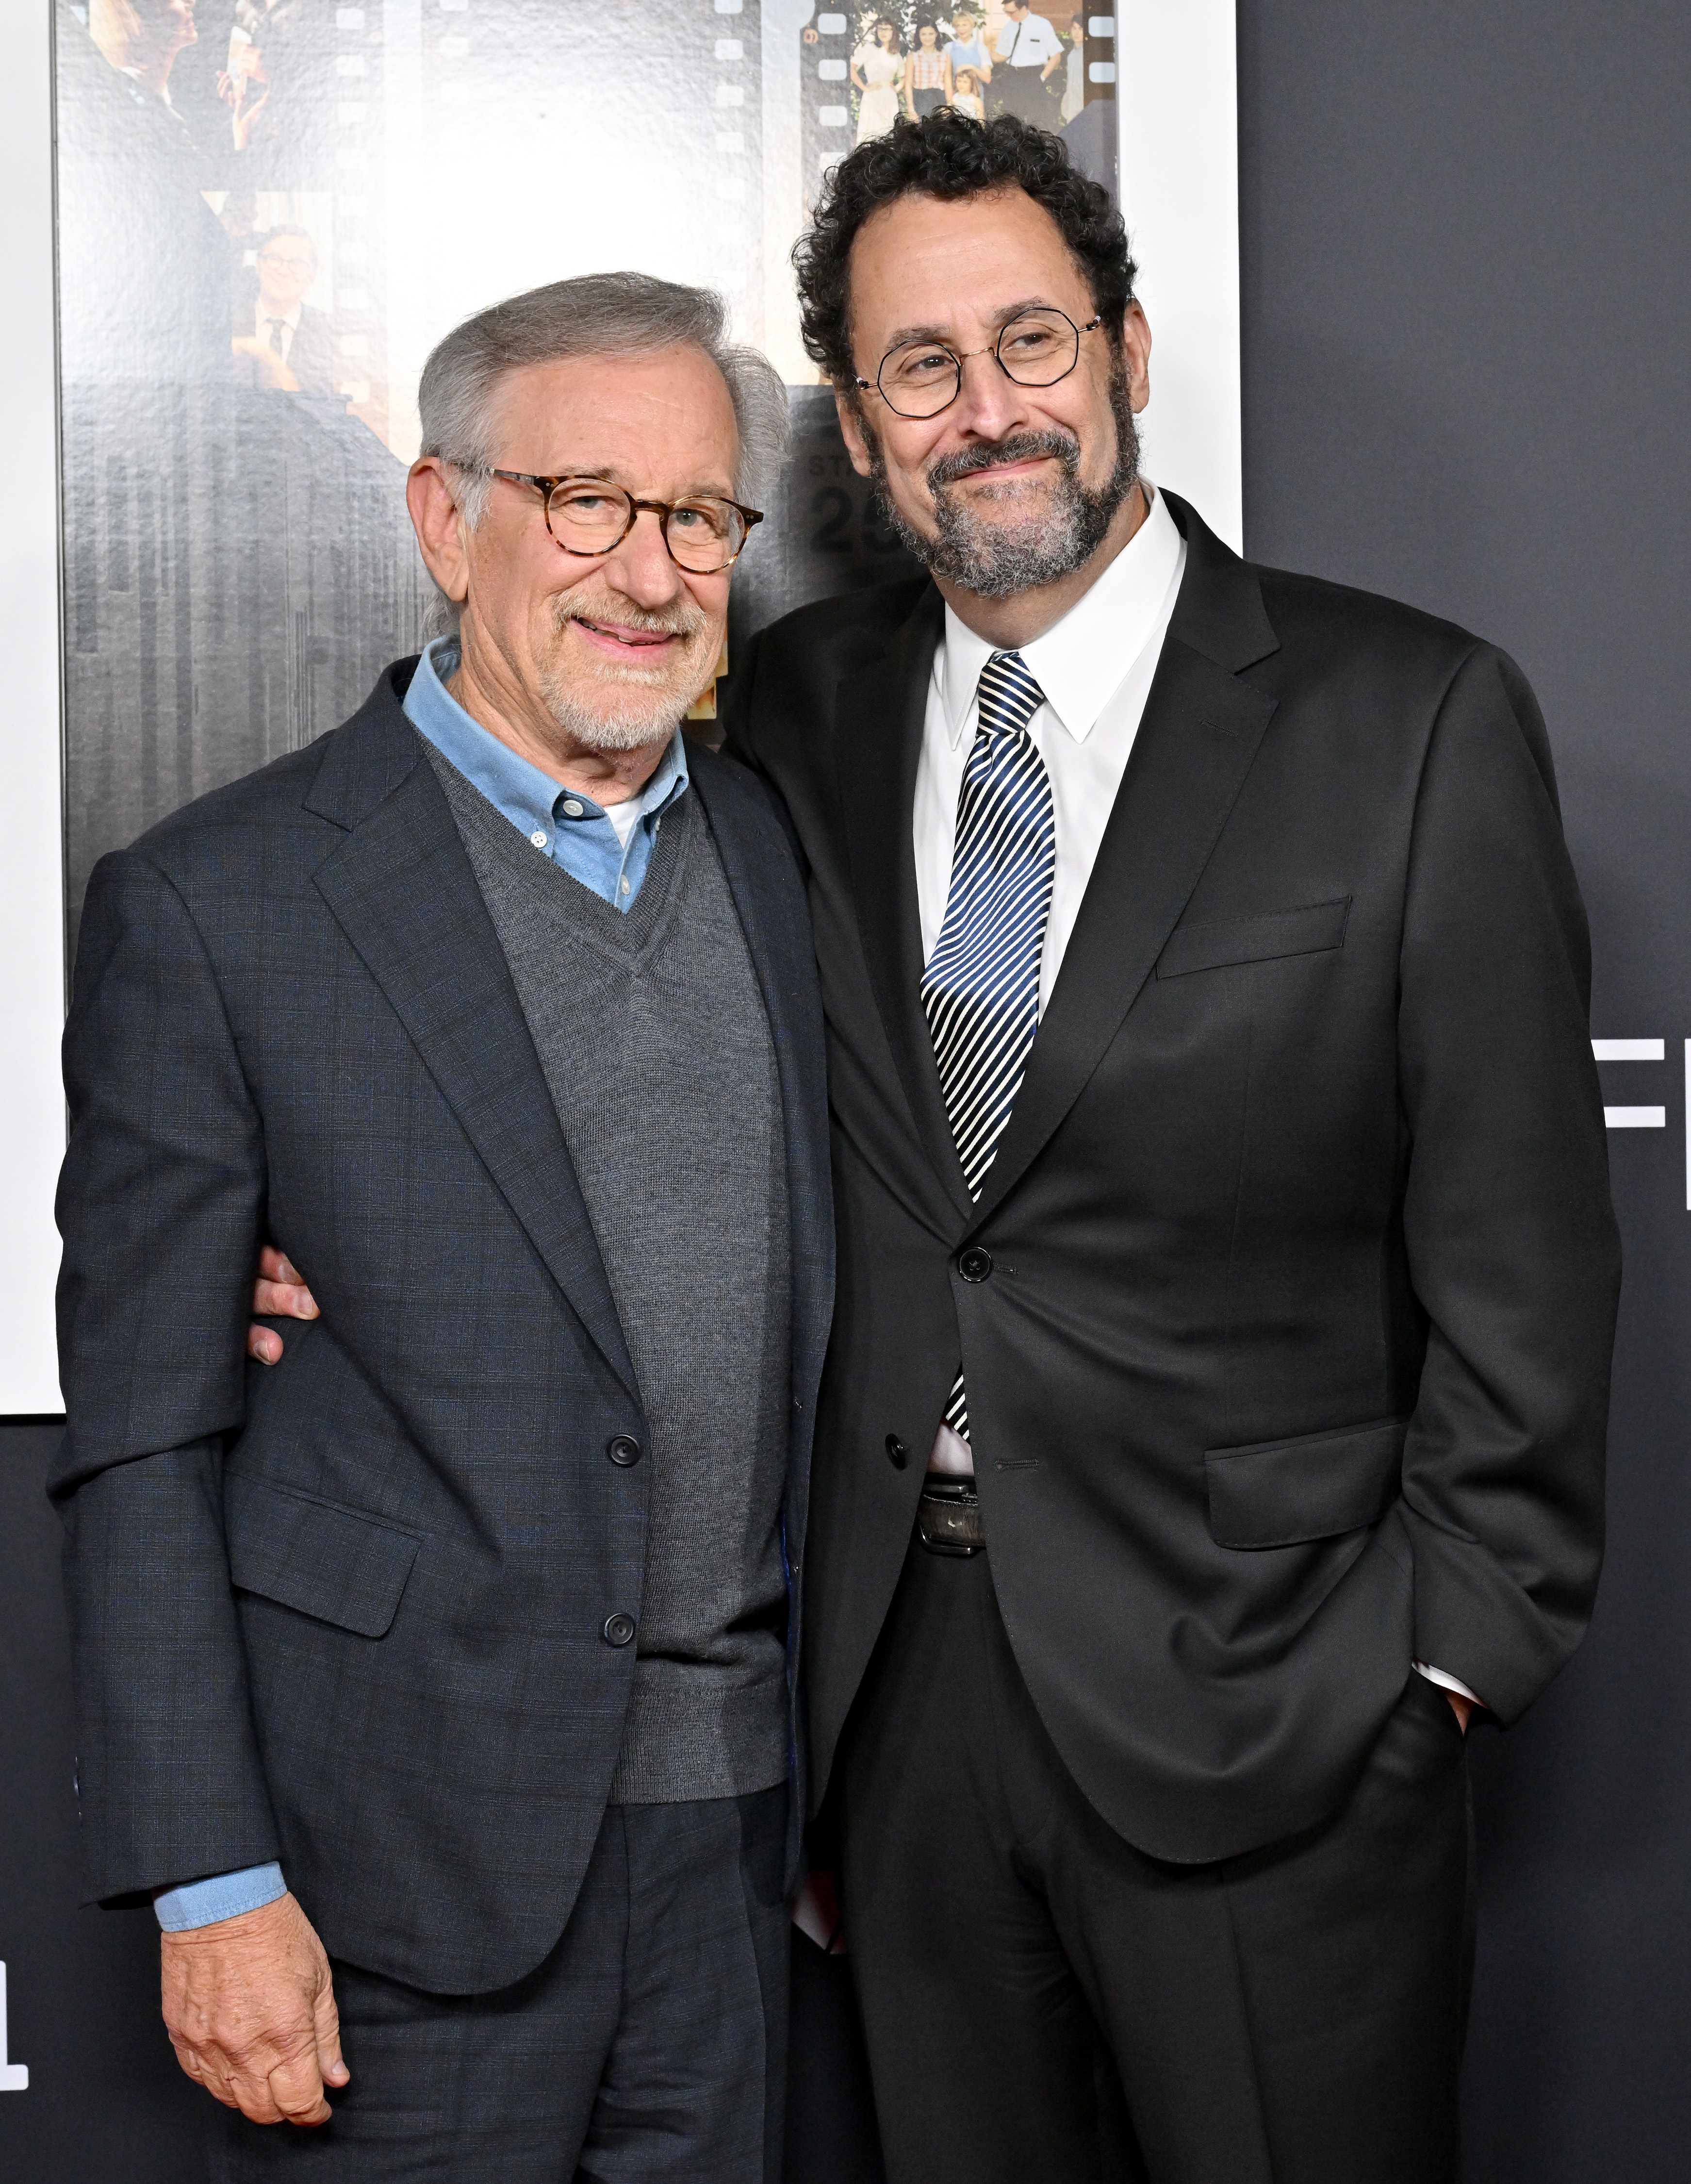 Steven Spielberg and Tony Kushner attend the 2022 AFI Fest - “The Fabelmans” Closing Night Gala Premiere at TCL Chinese Theatre on November 06, 2022 in Hollywood, California.